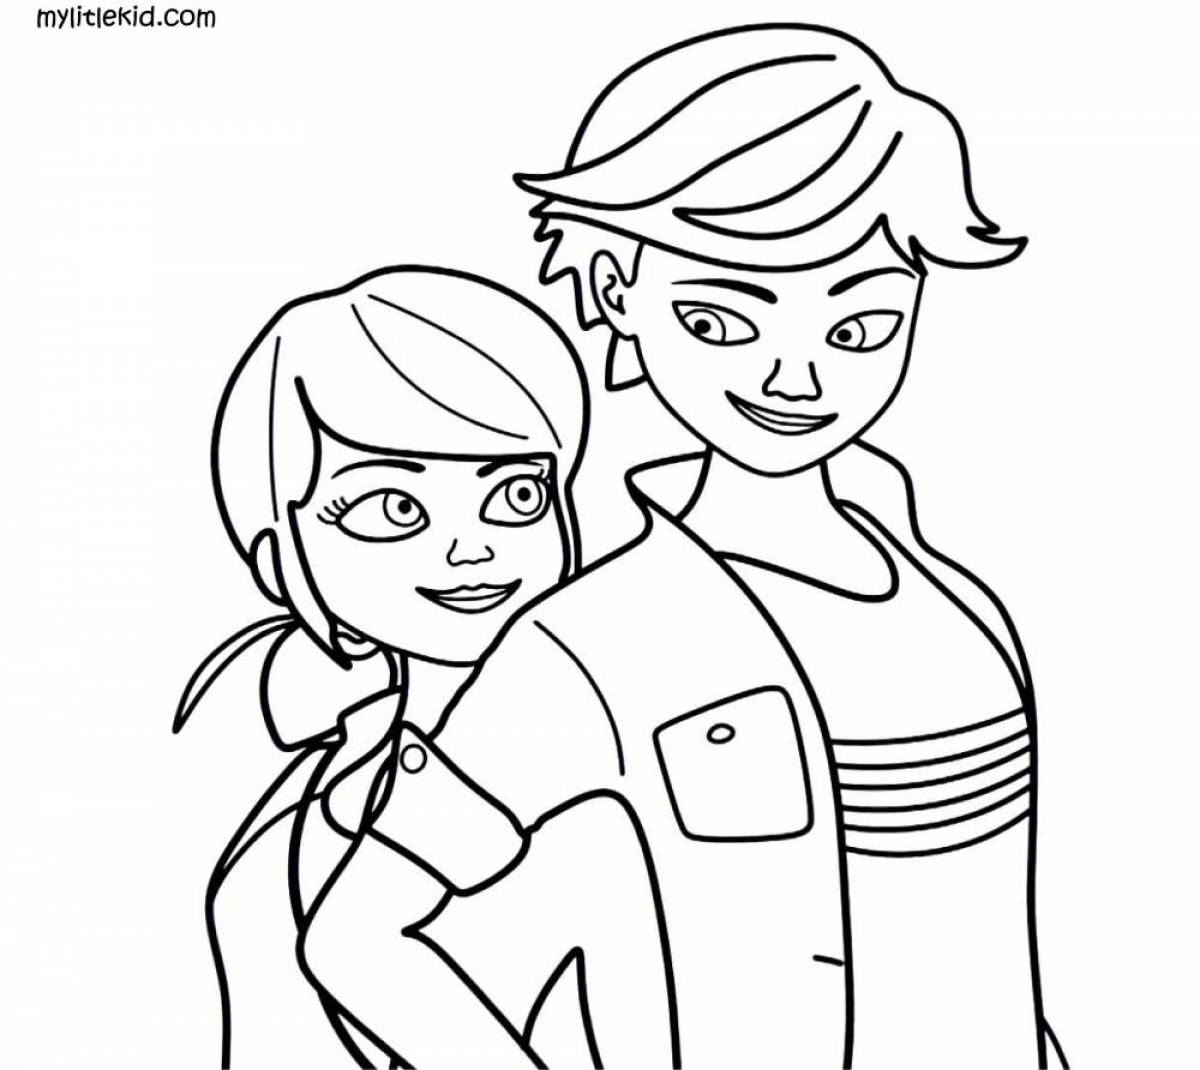 Attractive marinette coloring page